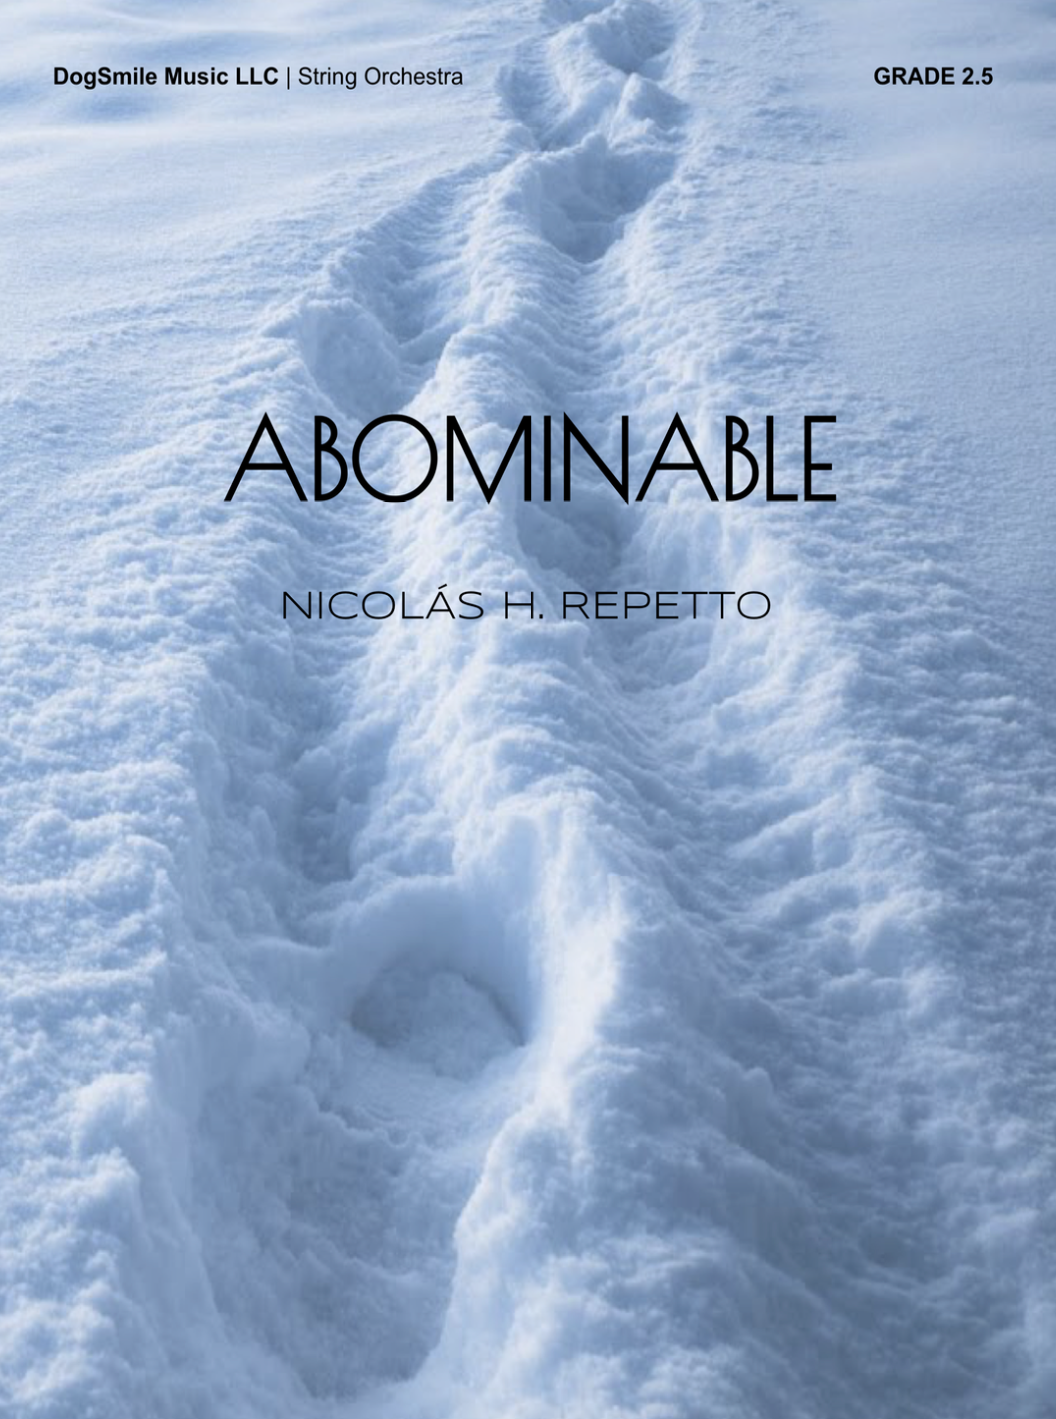 Abominable by Nicolas Repetto